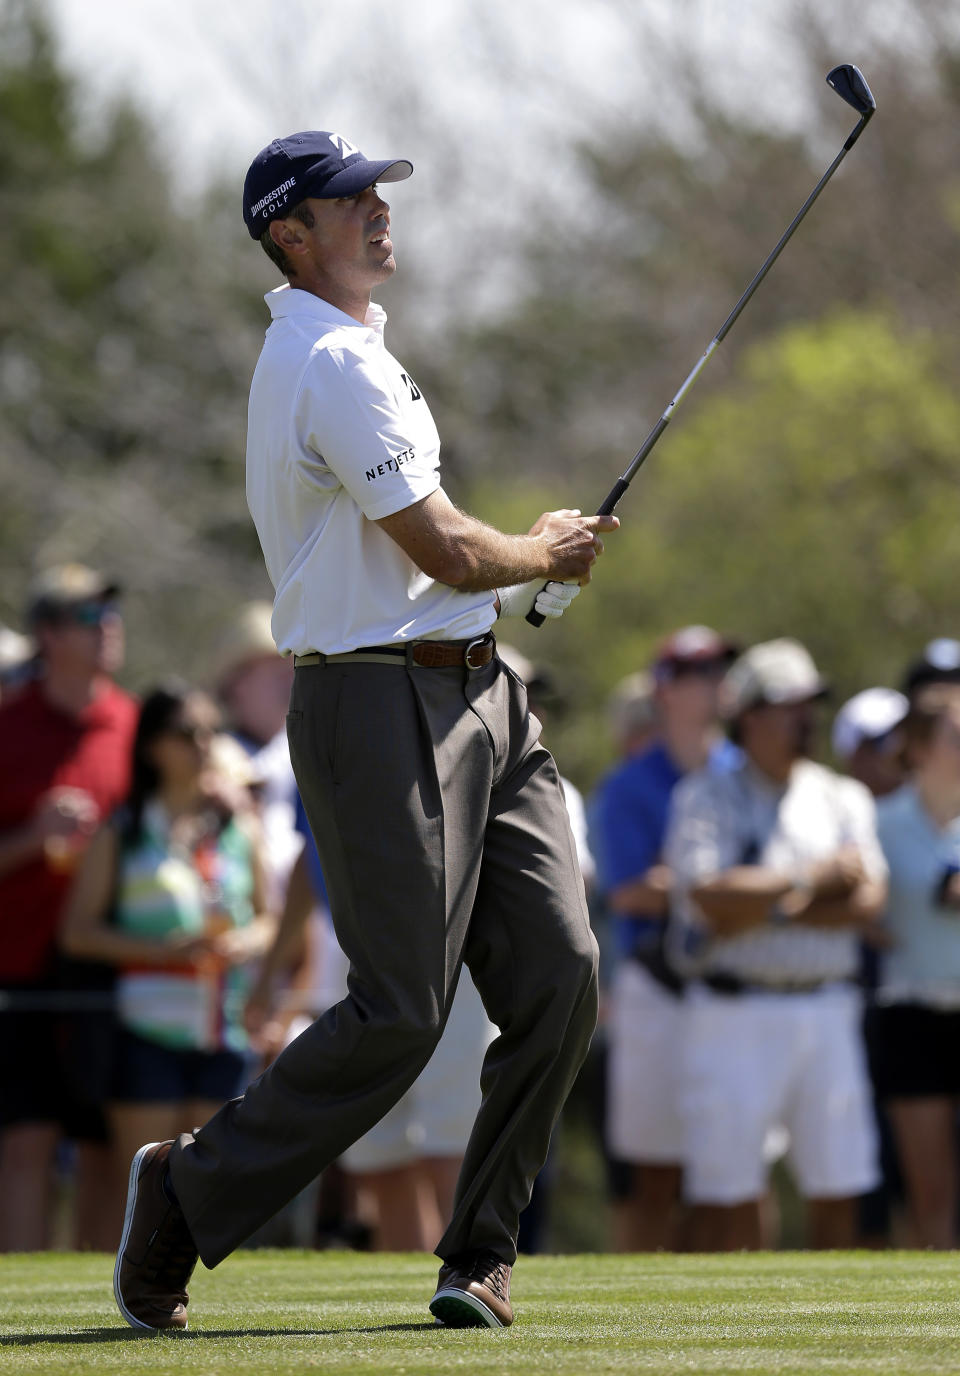 Matt Kuchar watches his tee shot on the third hole during the final round of the Texas Open golf tournament on Sunday, March 30, 2014, in San Antonio. (AP Photo/Eric Gay)